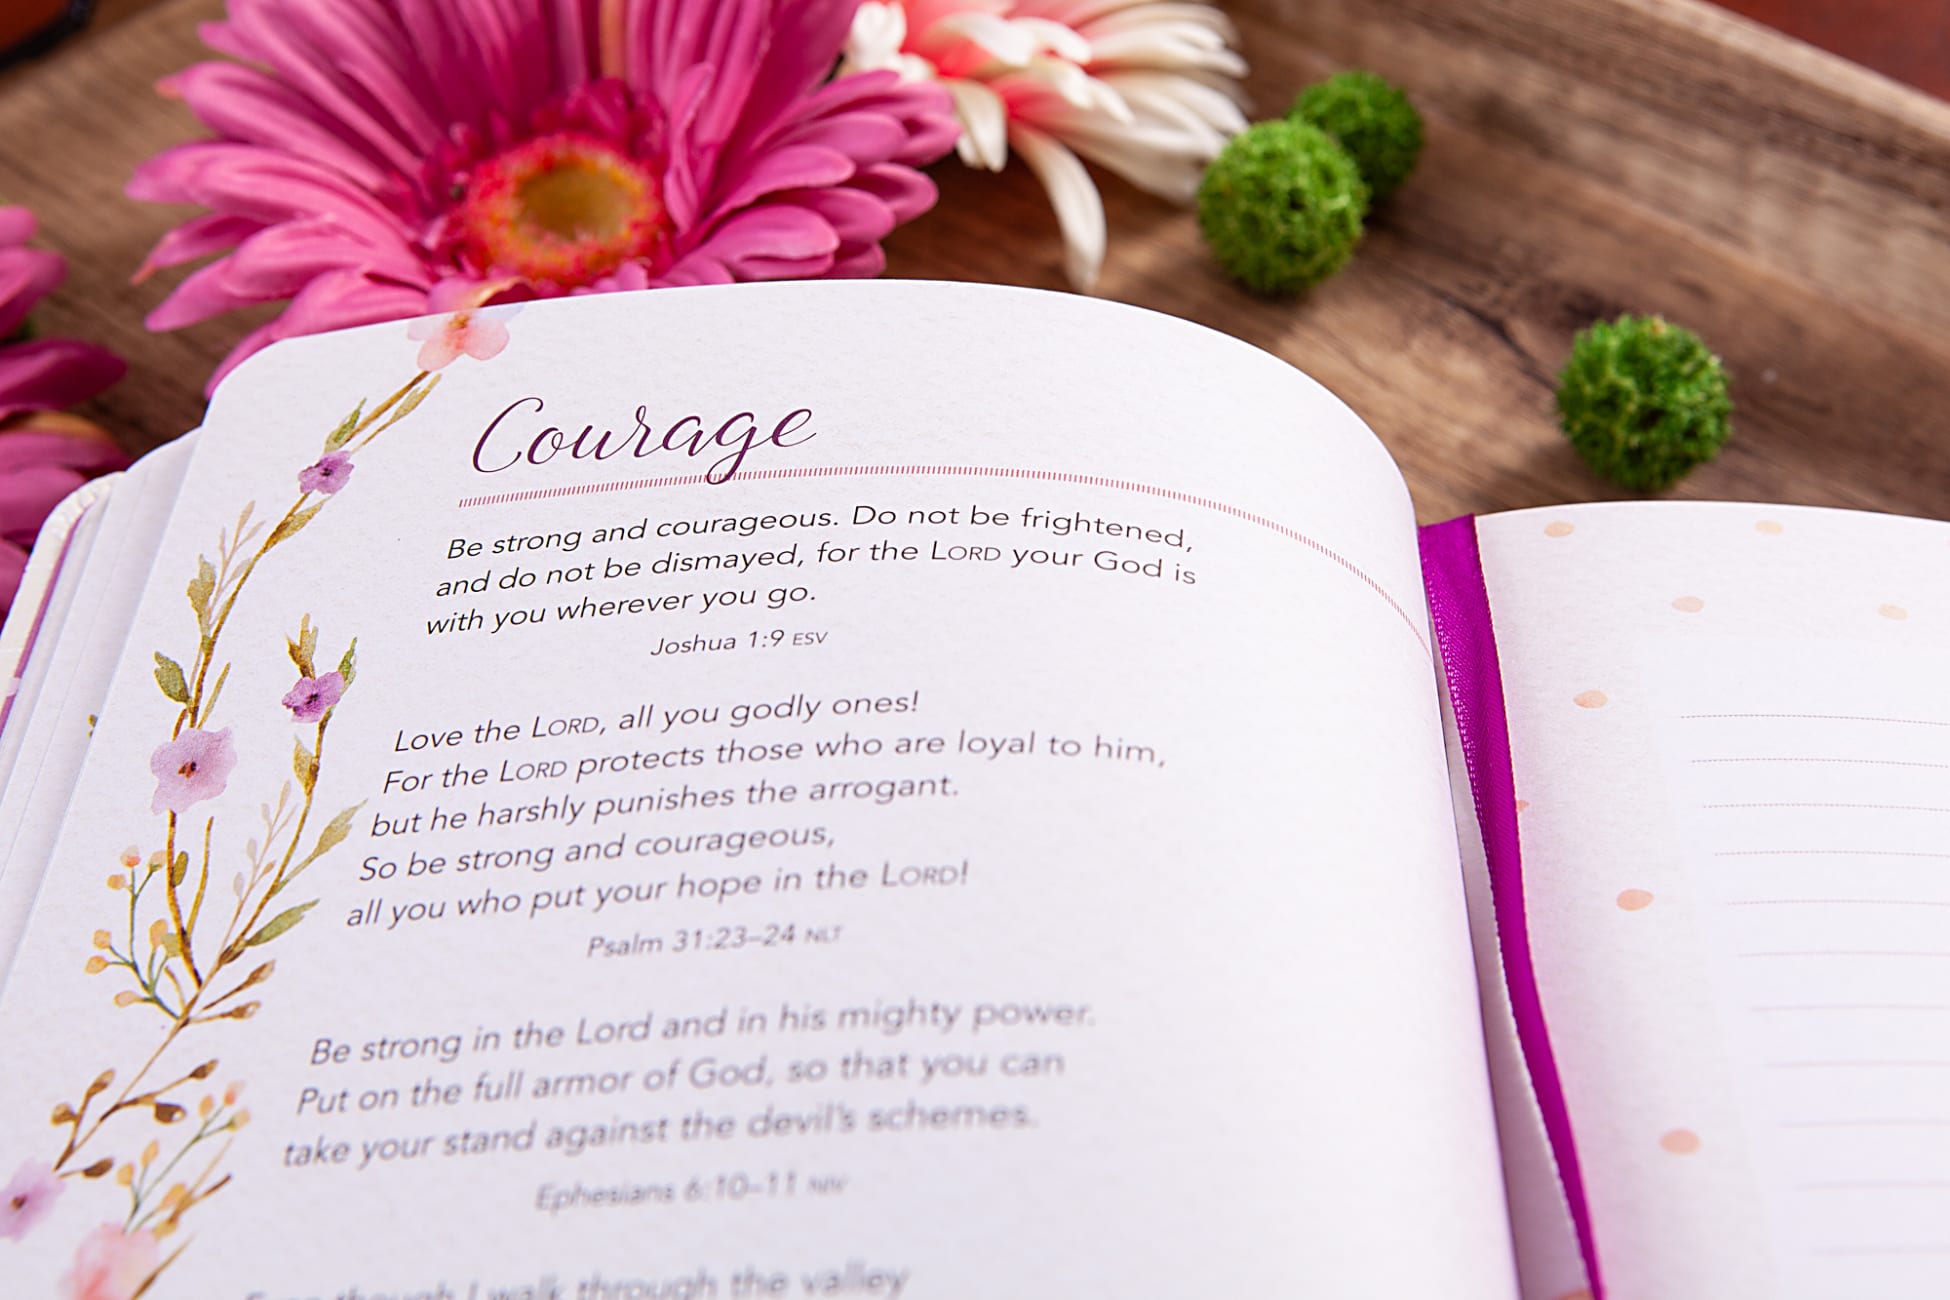 Journal: Delight Yourself in the Lord - Bible Promise Journal For Women Imitation Leather